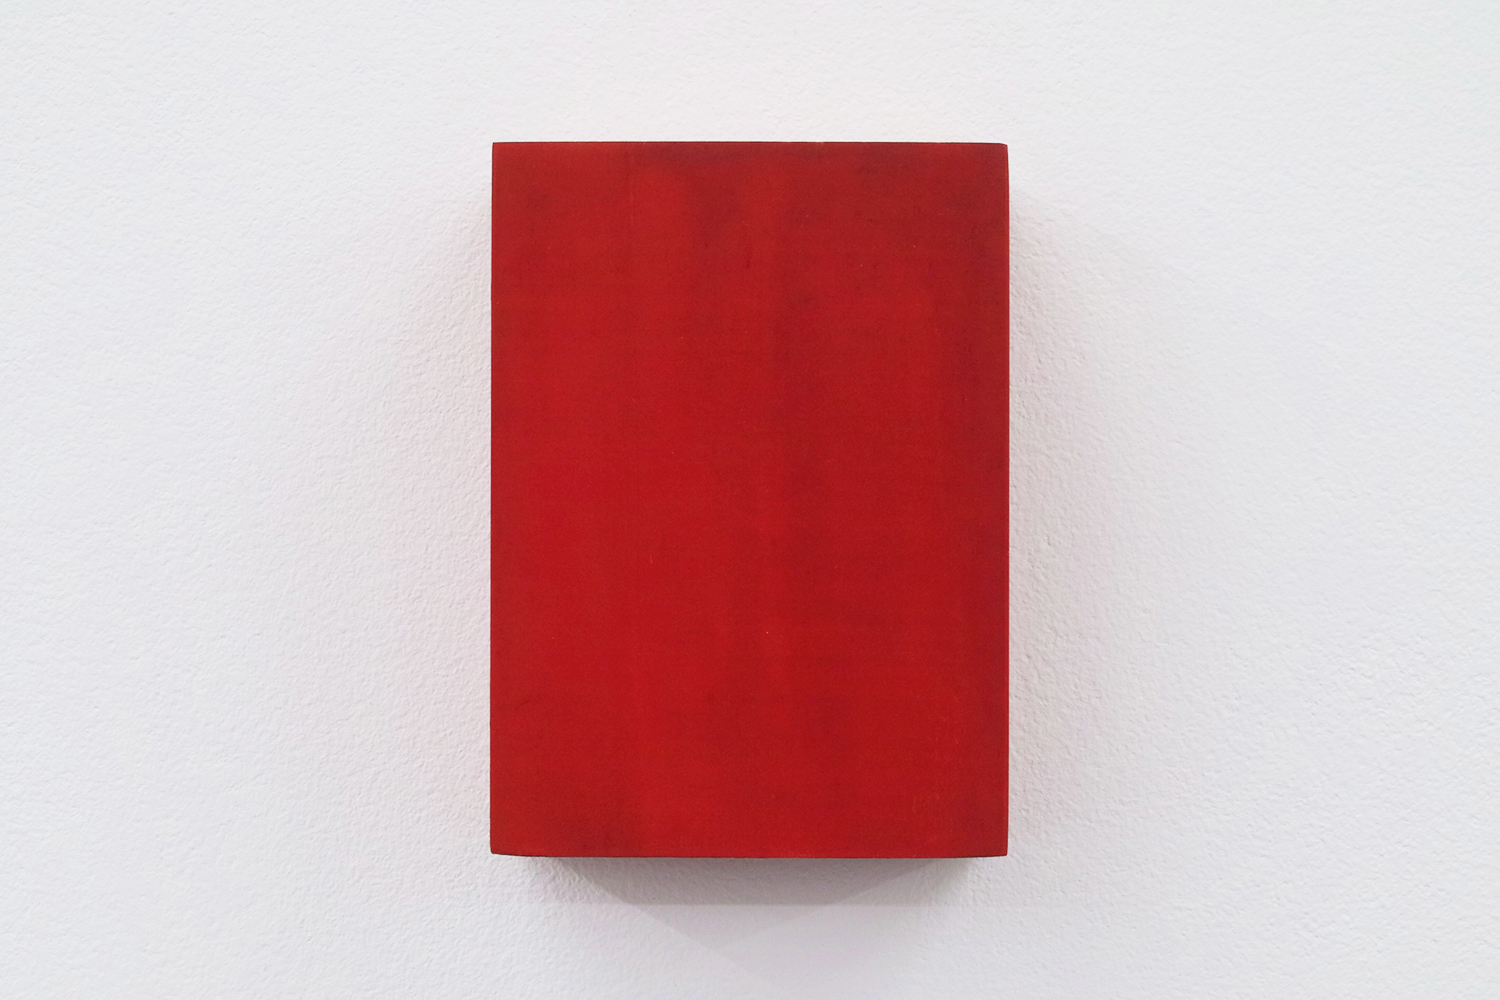 Text No. 434<br>pigment, acrylic on wood,  83 x 61 x 27 mm,  2003